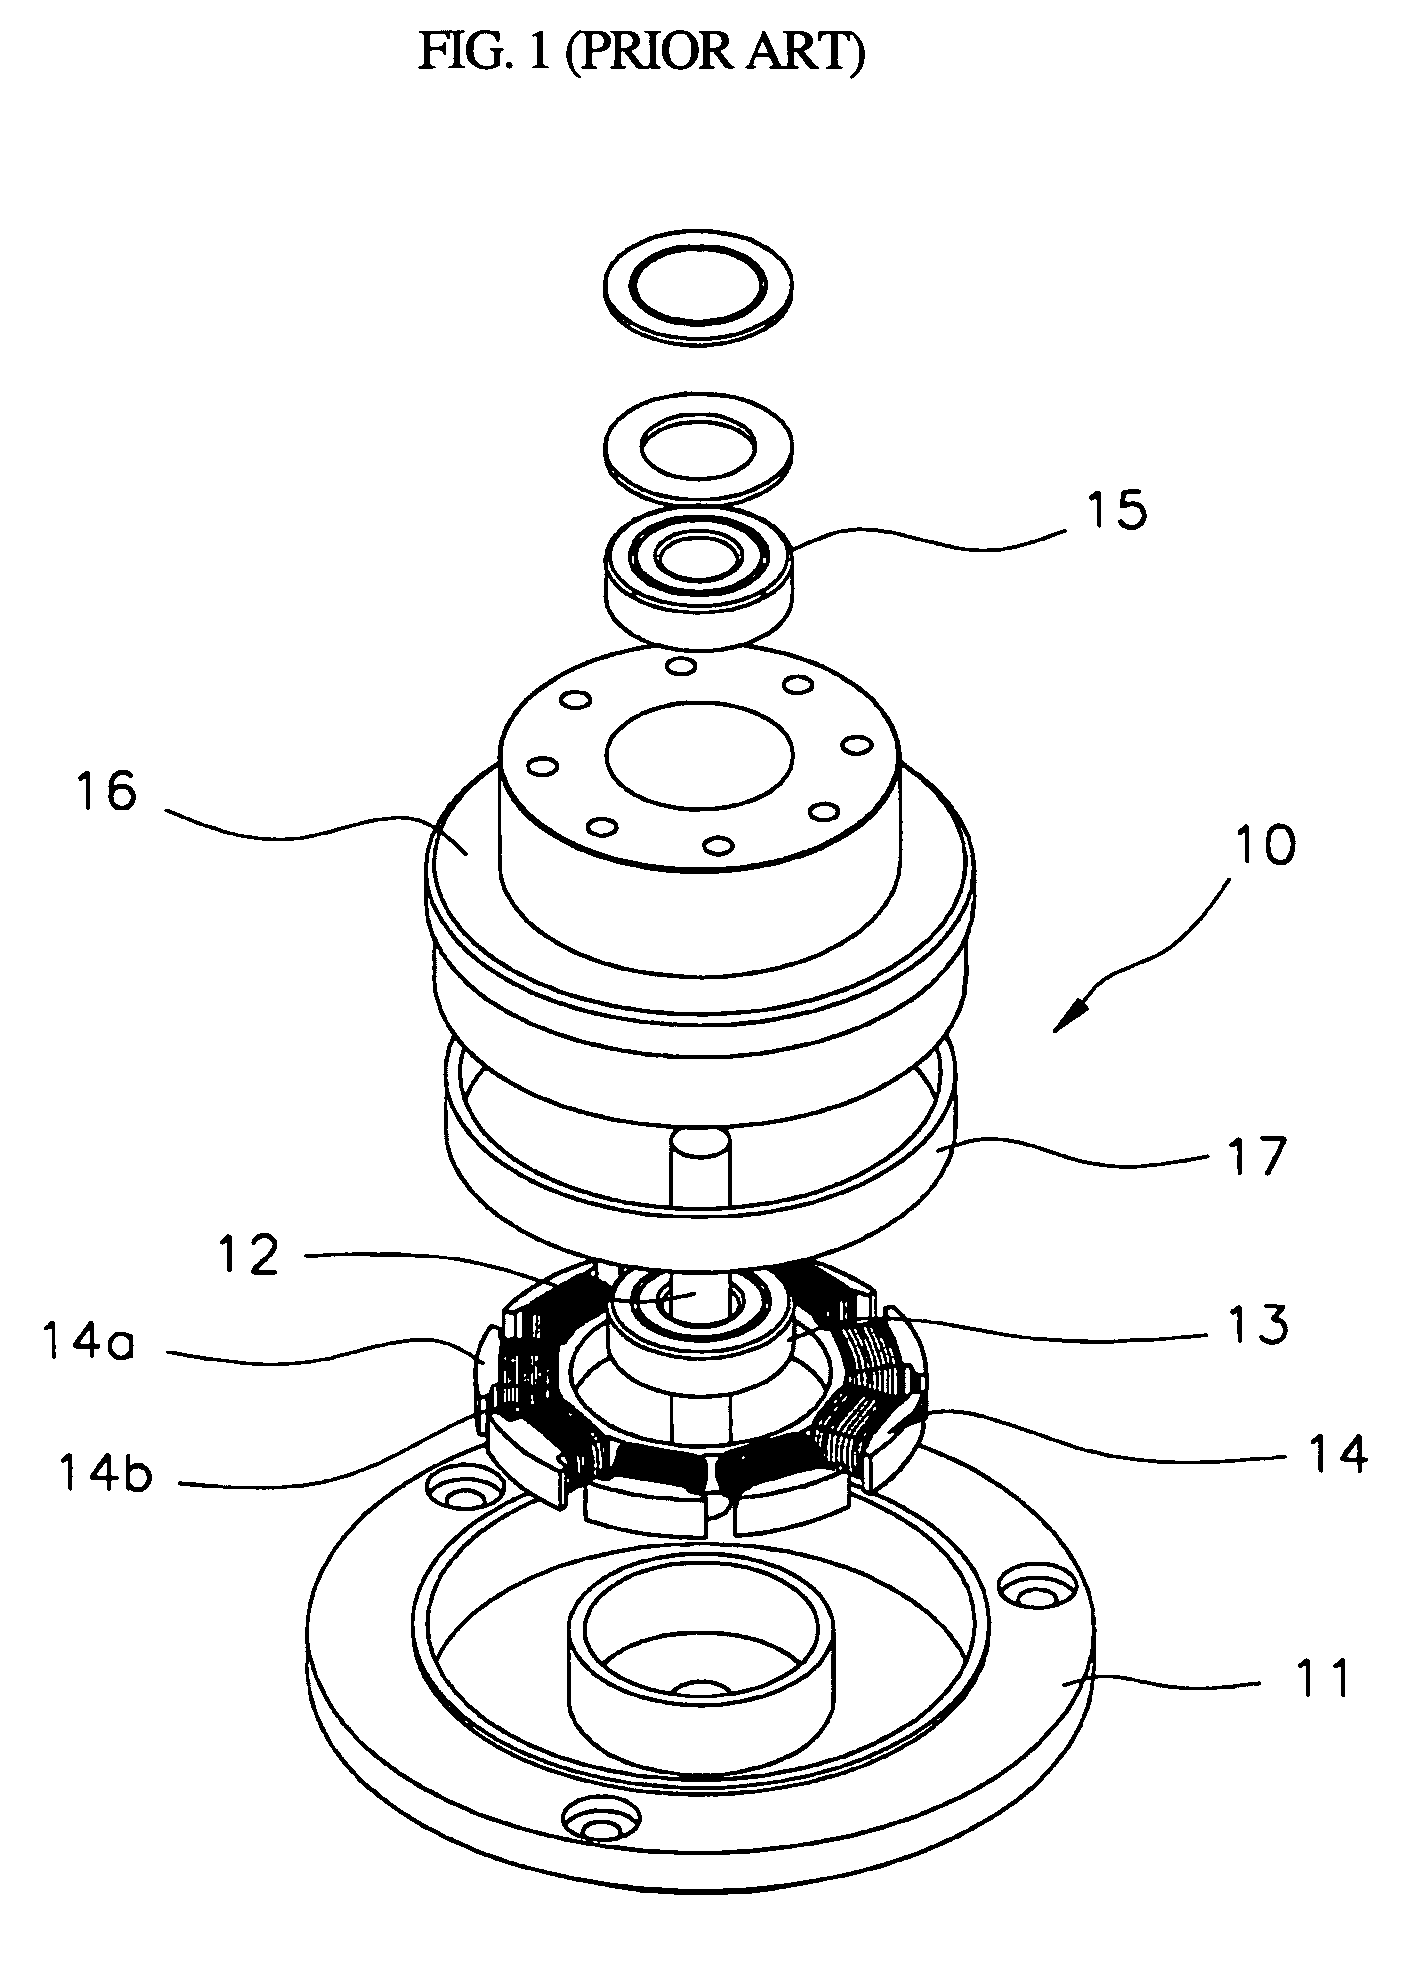 Aerodynamic bearing assembly for spindle motor for hard disk drives